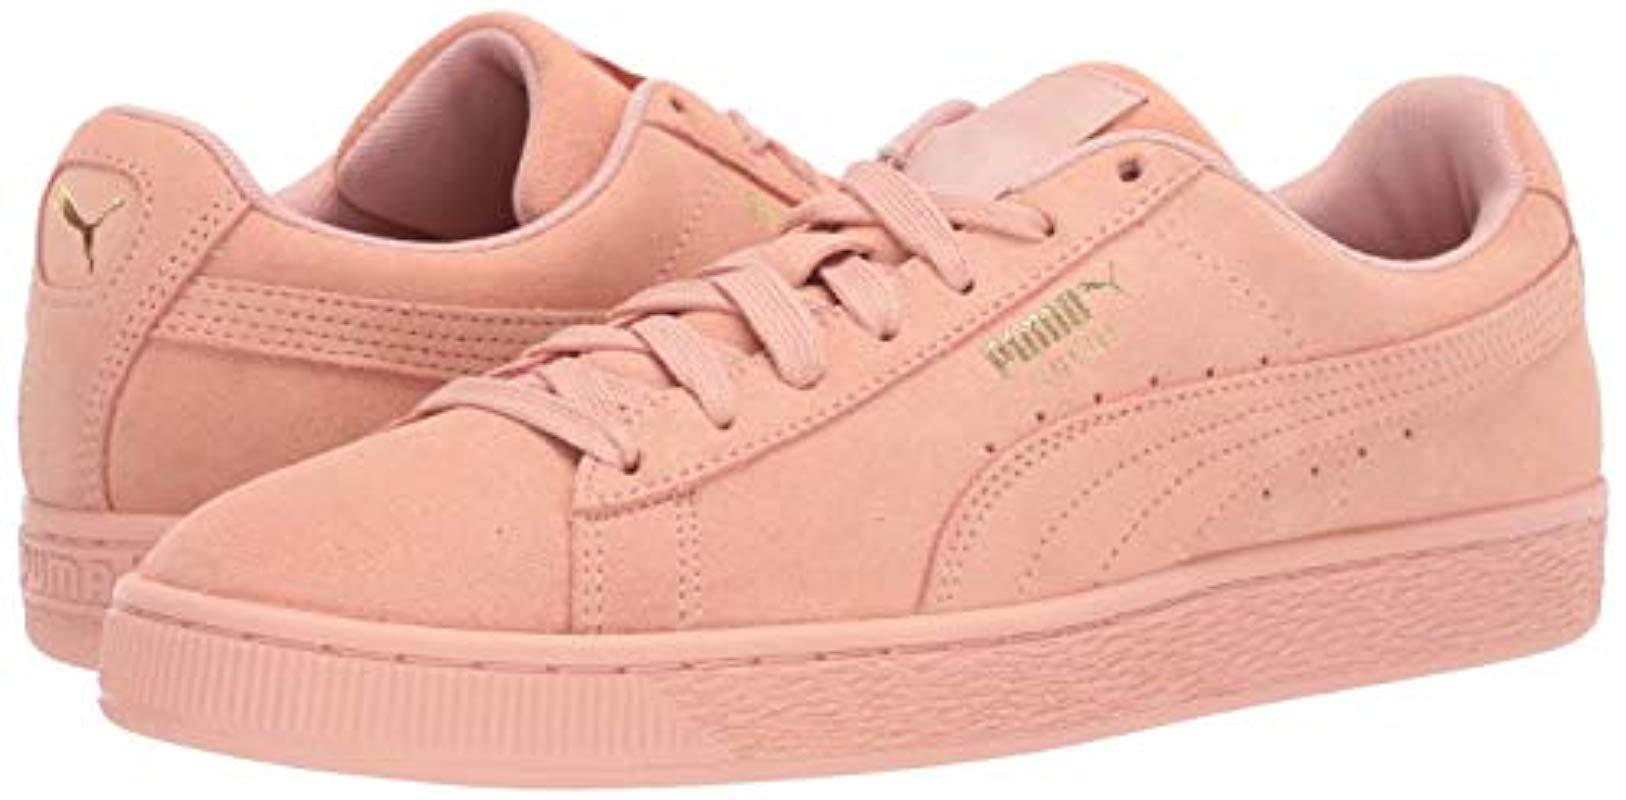 PUMA Suede Classic In Pink For Men Lyst | atelier-yuwa.ciao.jp